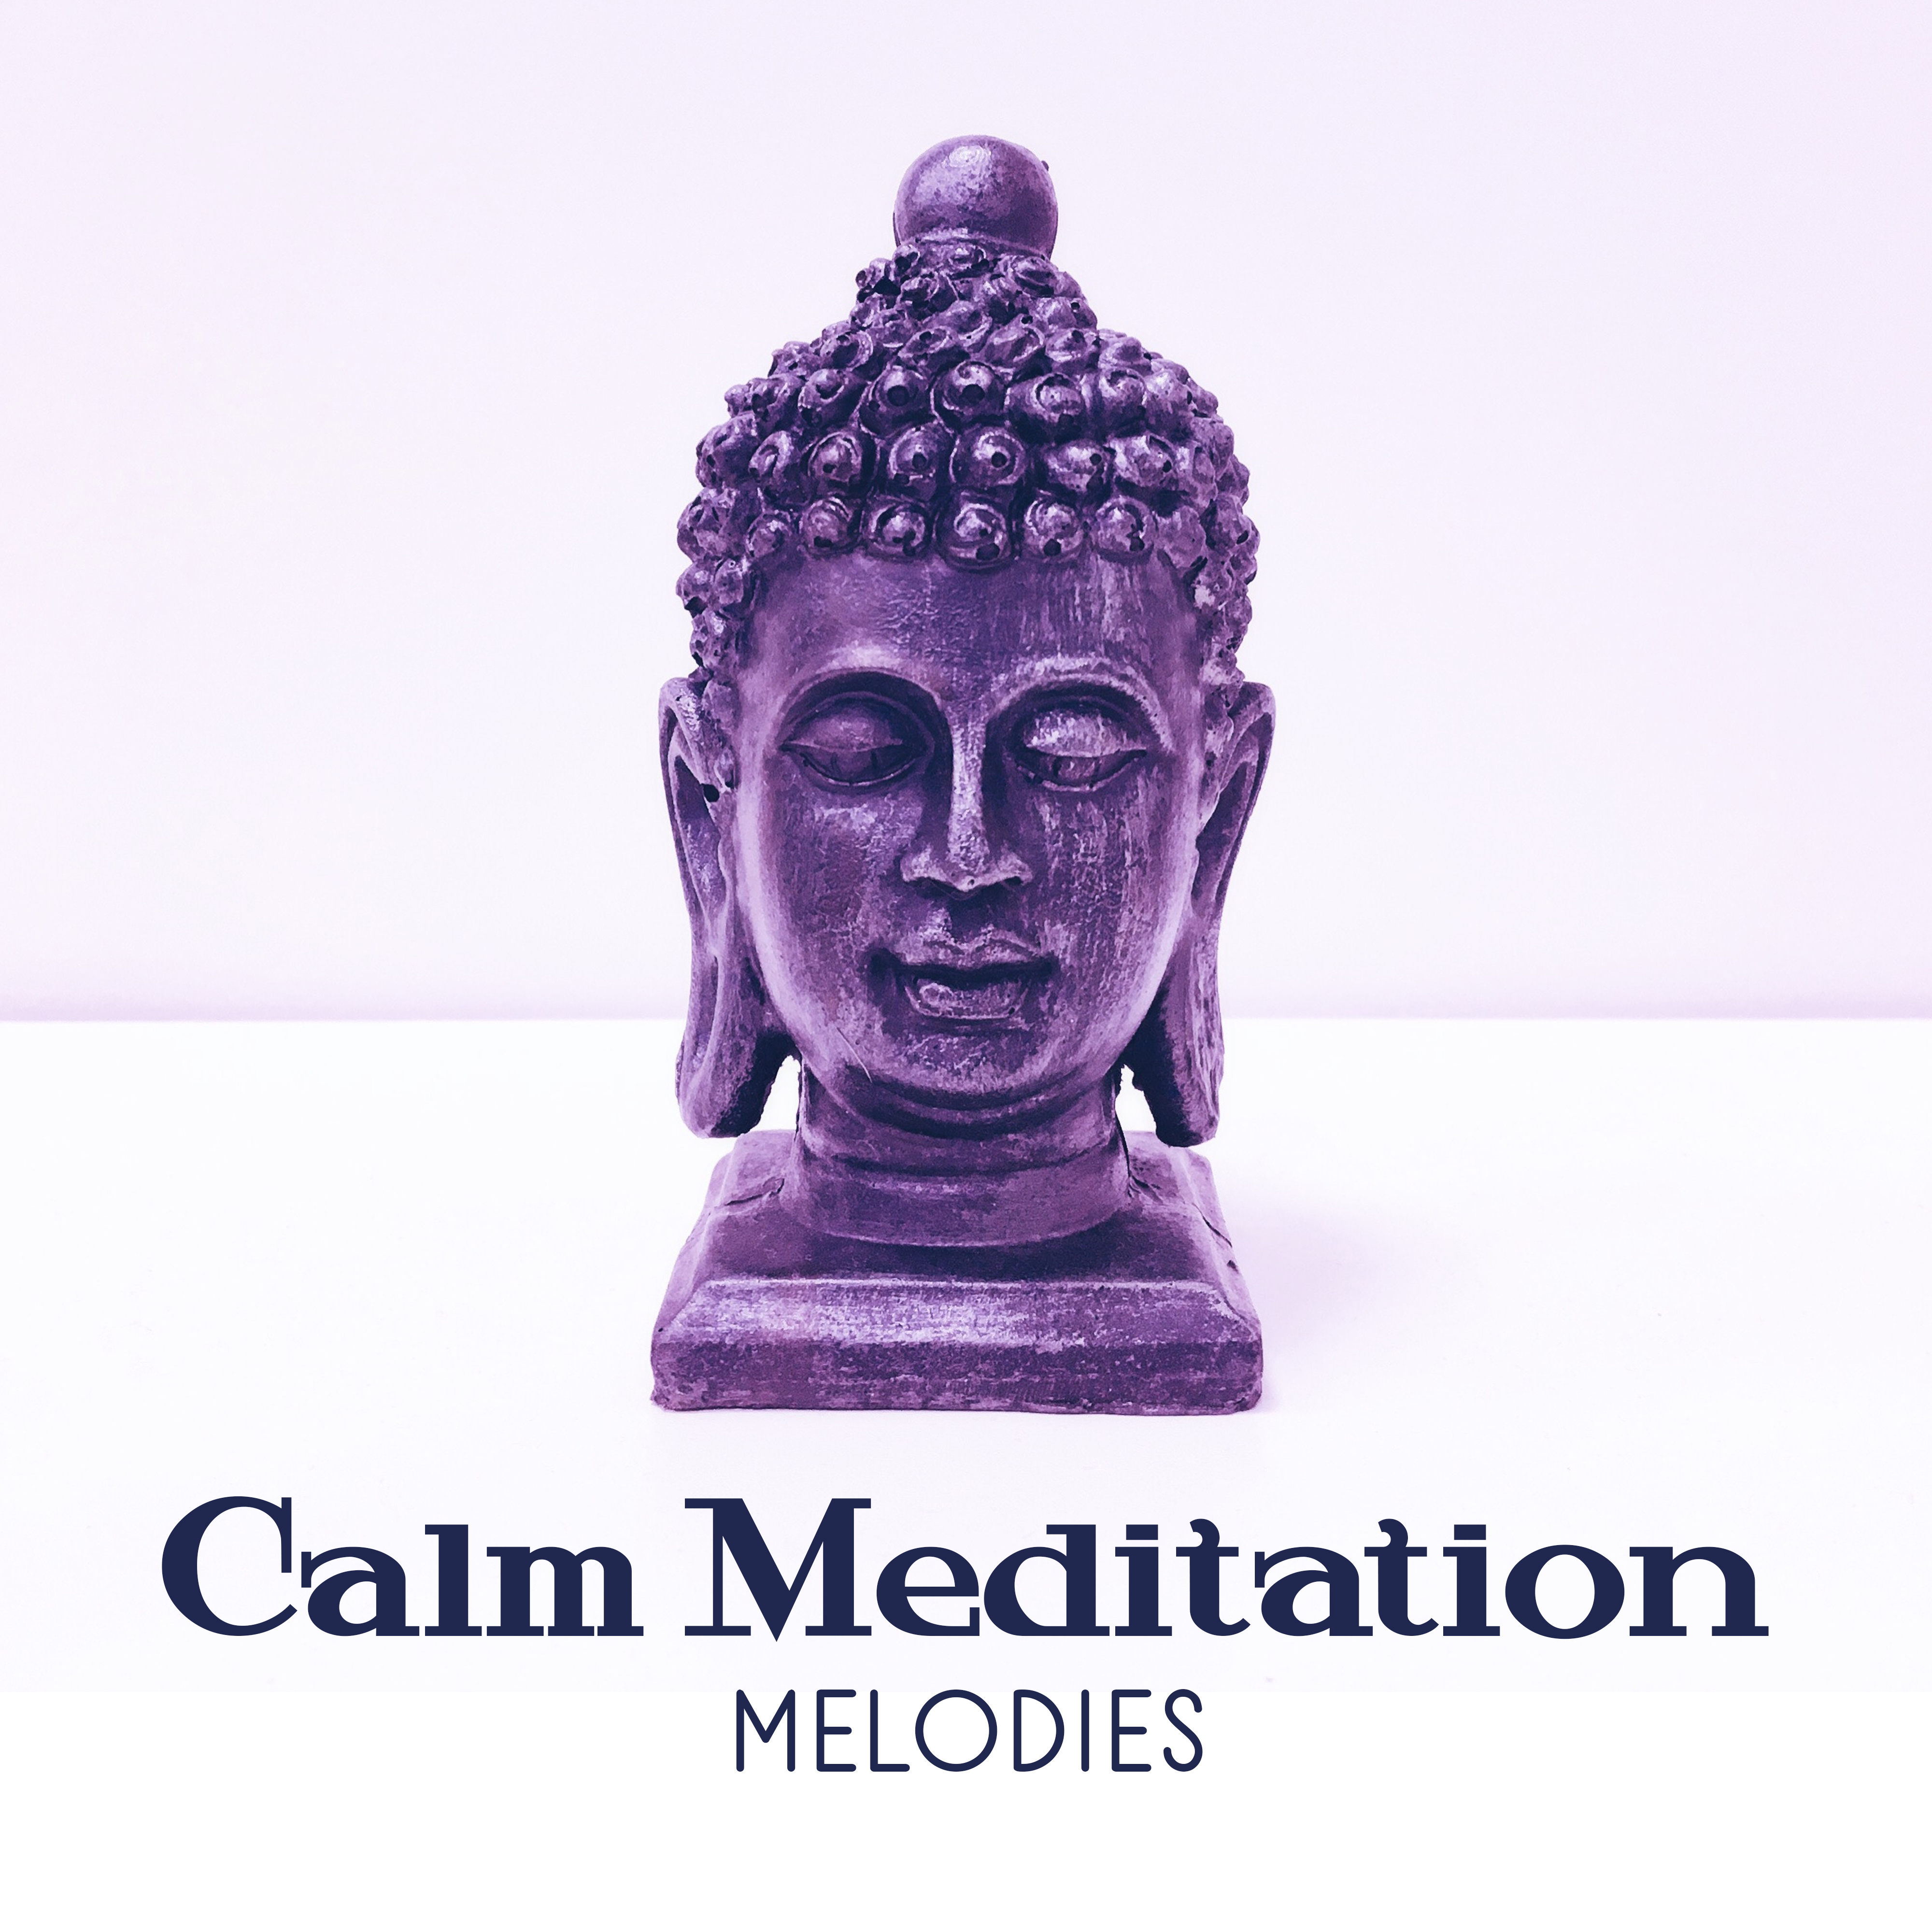 Calm Meditation Melodies – Soft Relaxing New Age Music, Zen Garden, Soothing Sounds to Meditate